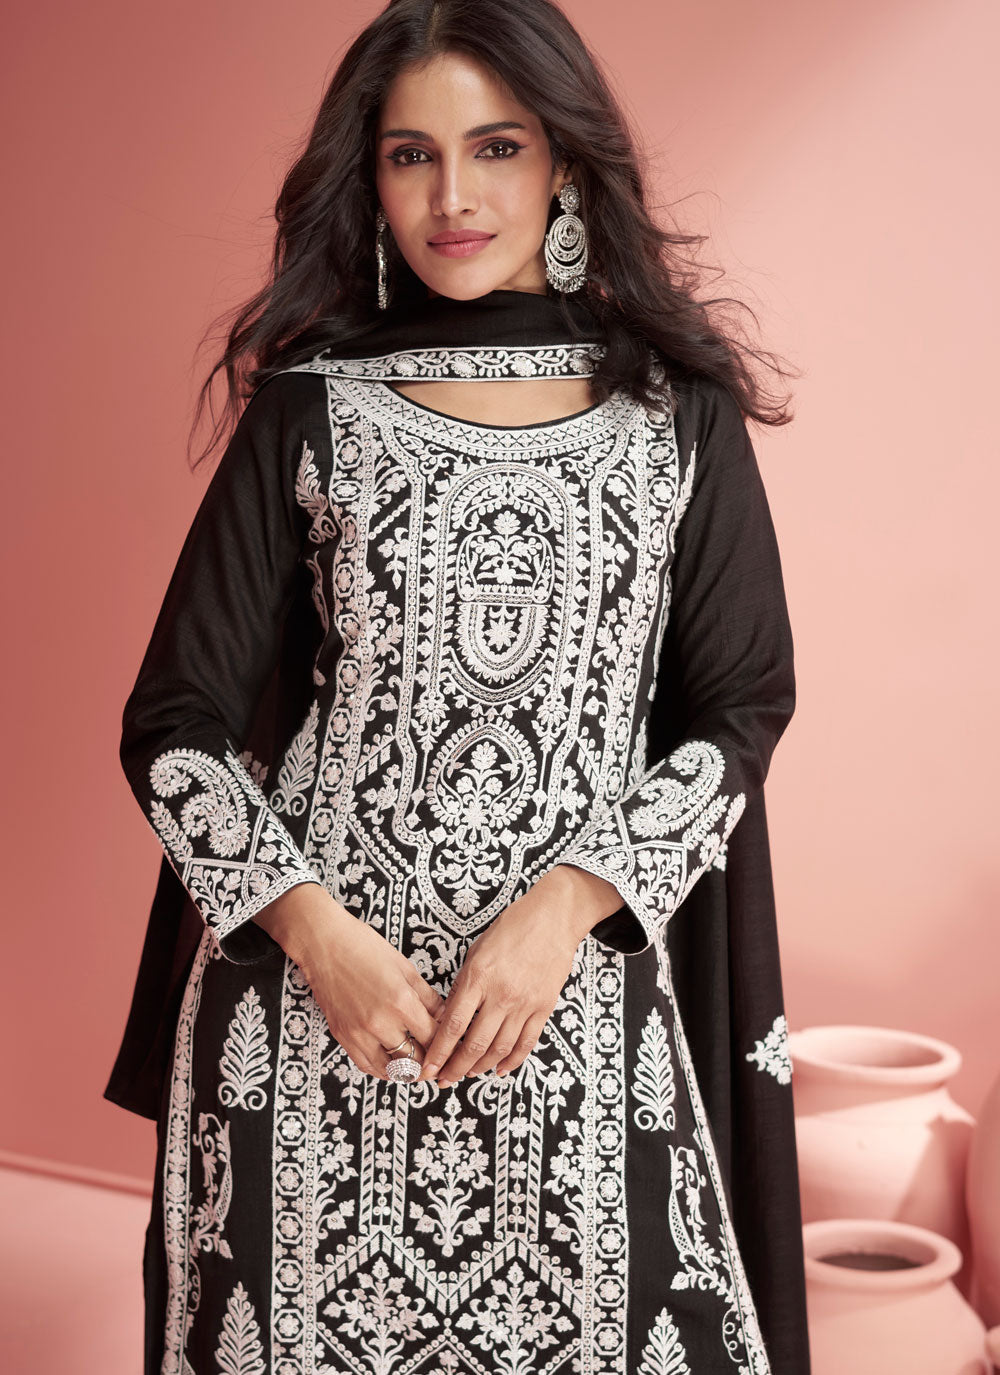 Black Silk Readymade Salwar Suit With Embroidered And Sequins Work